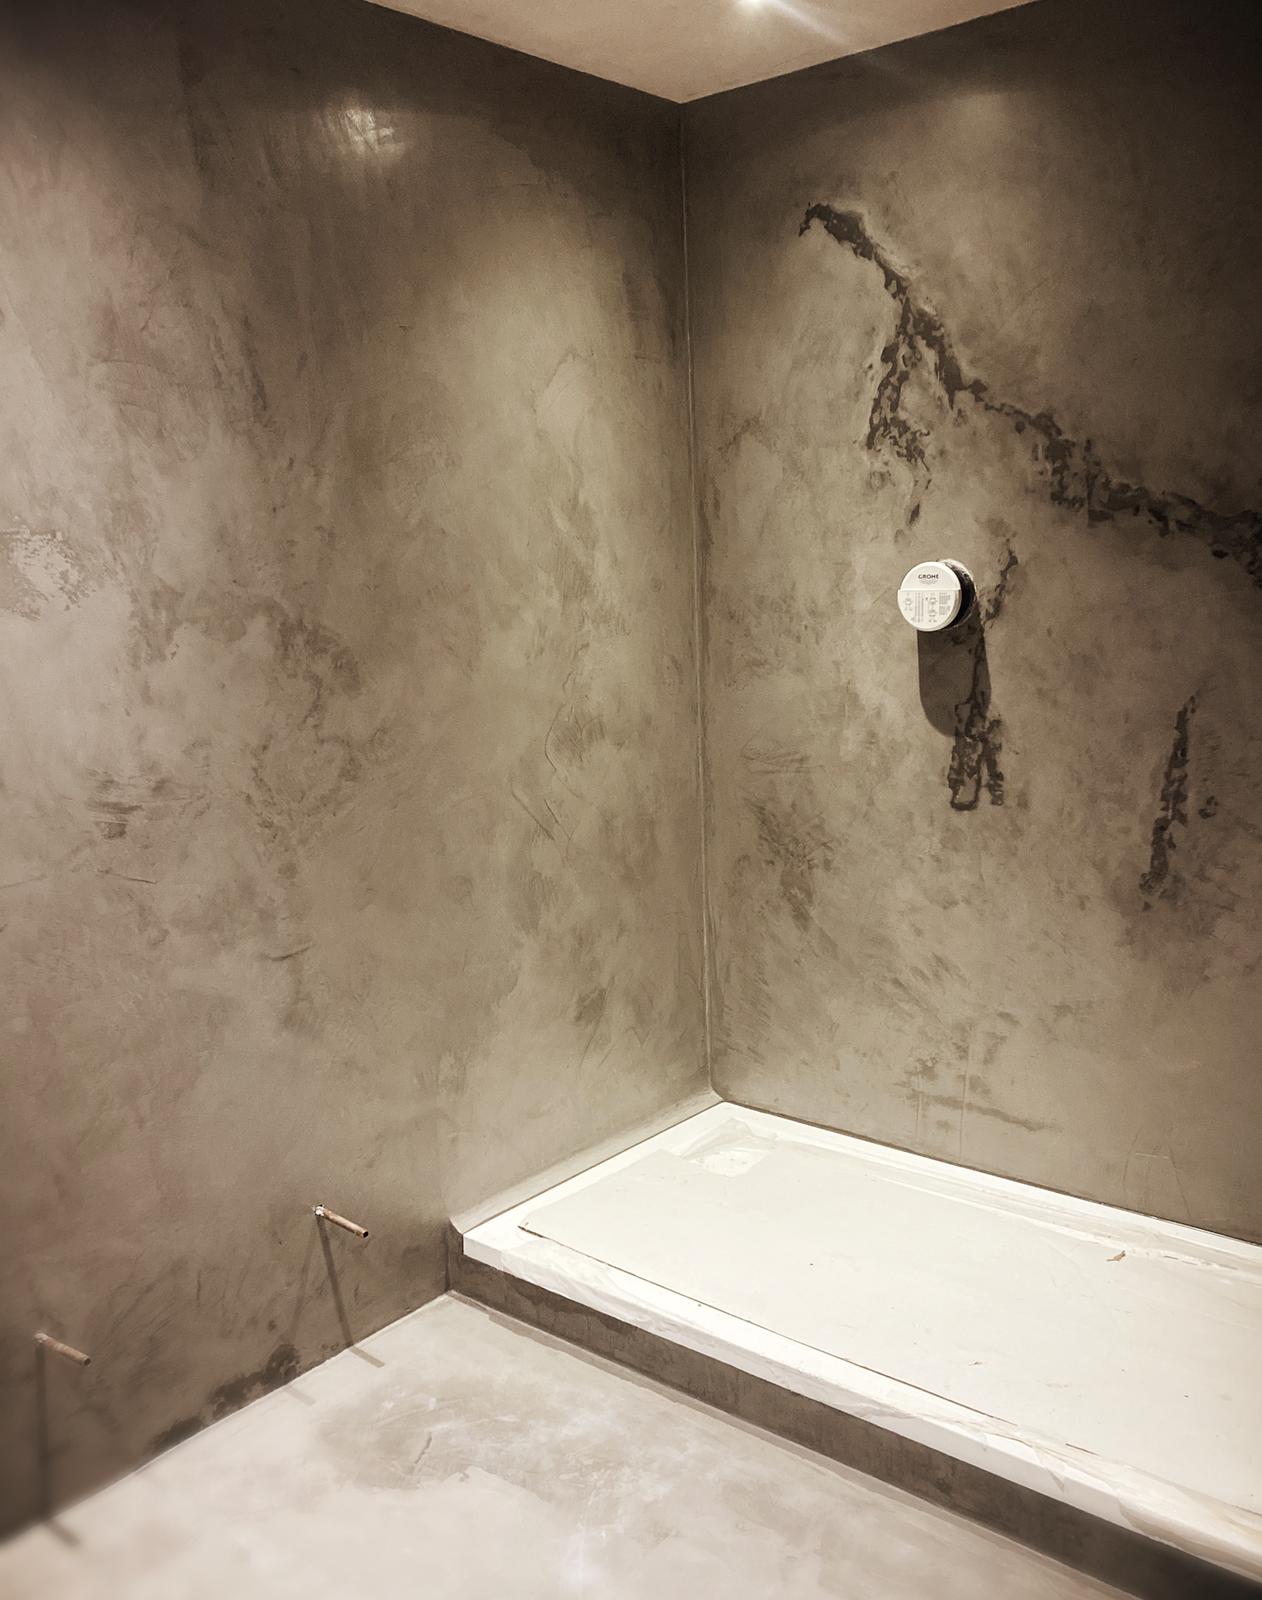 Venetian Plaster VS Microcement, What To Use Where